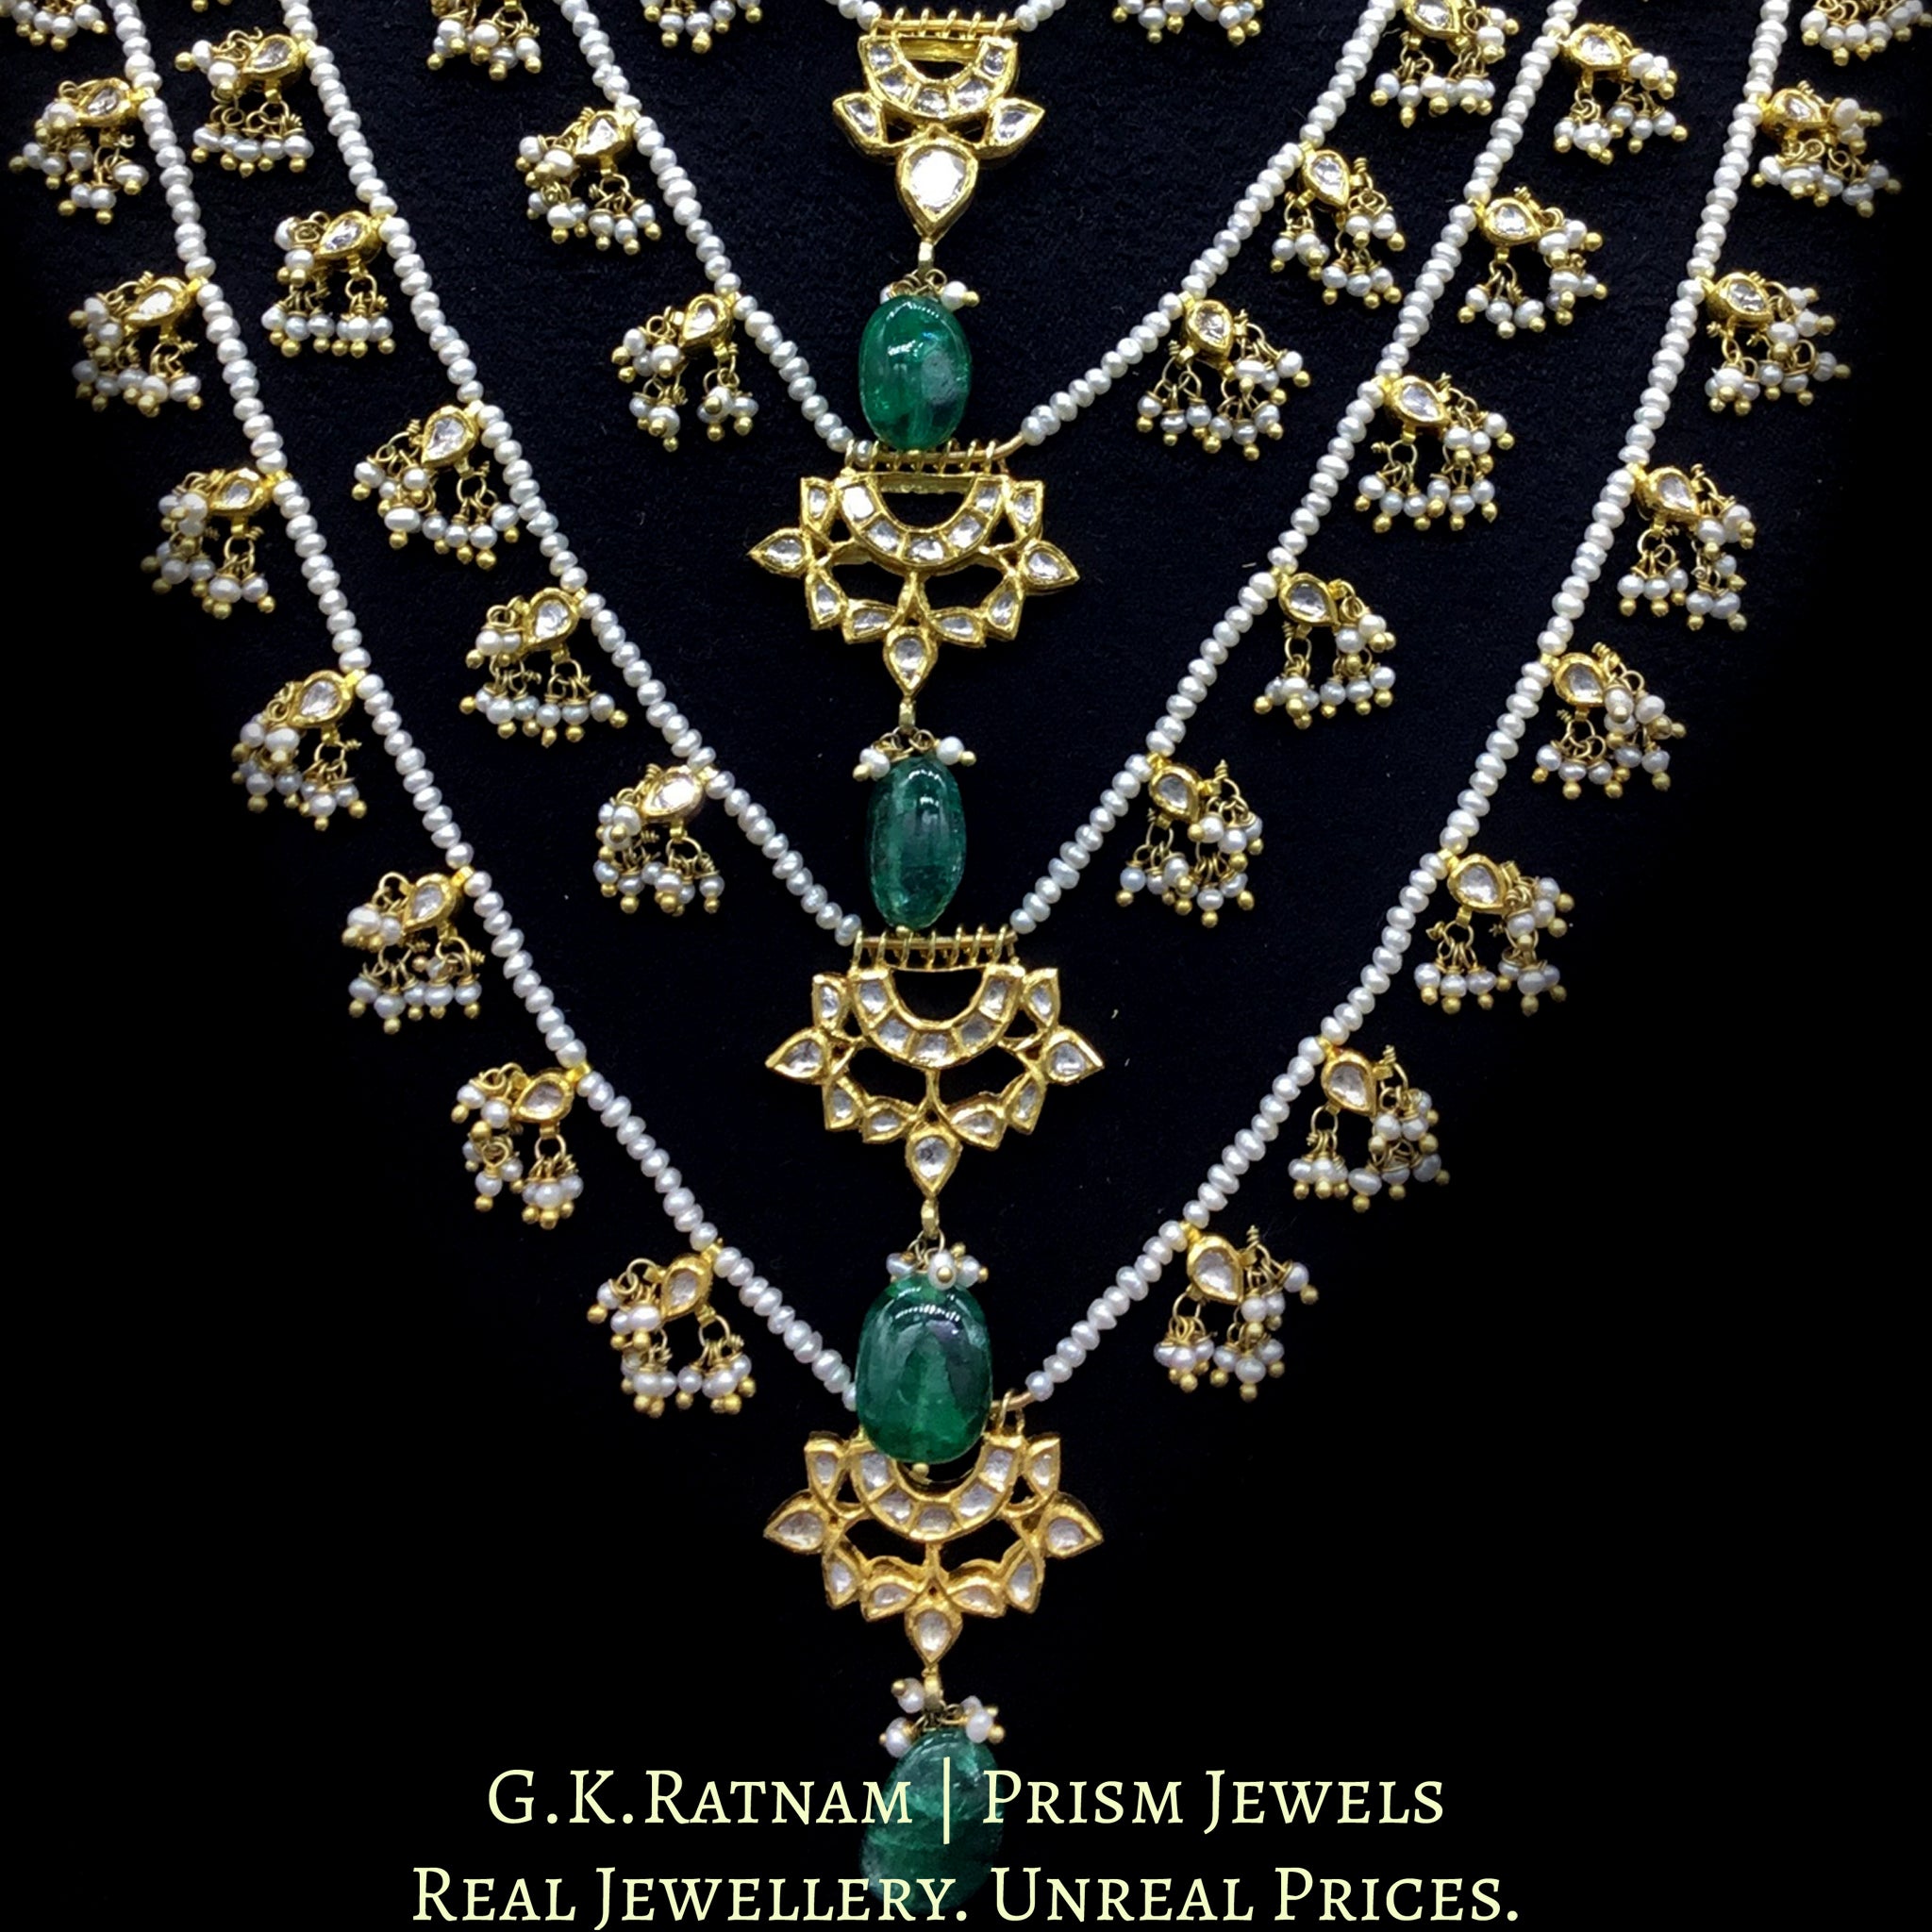 18k Gold and Diamond Polki panch-lad (five-row) Necklace with Natural Freshwater Pearls